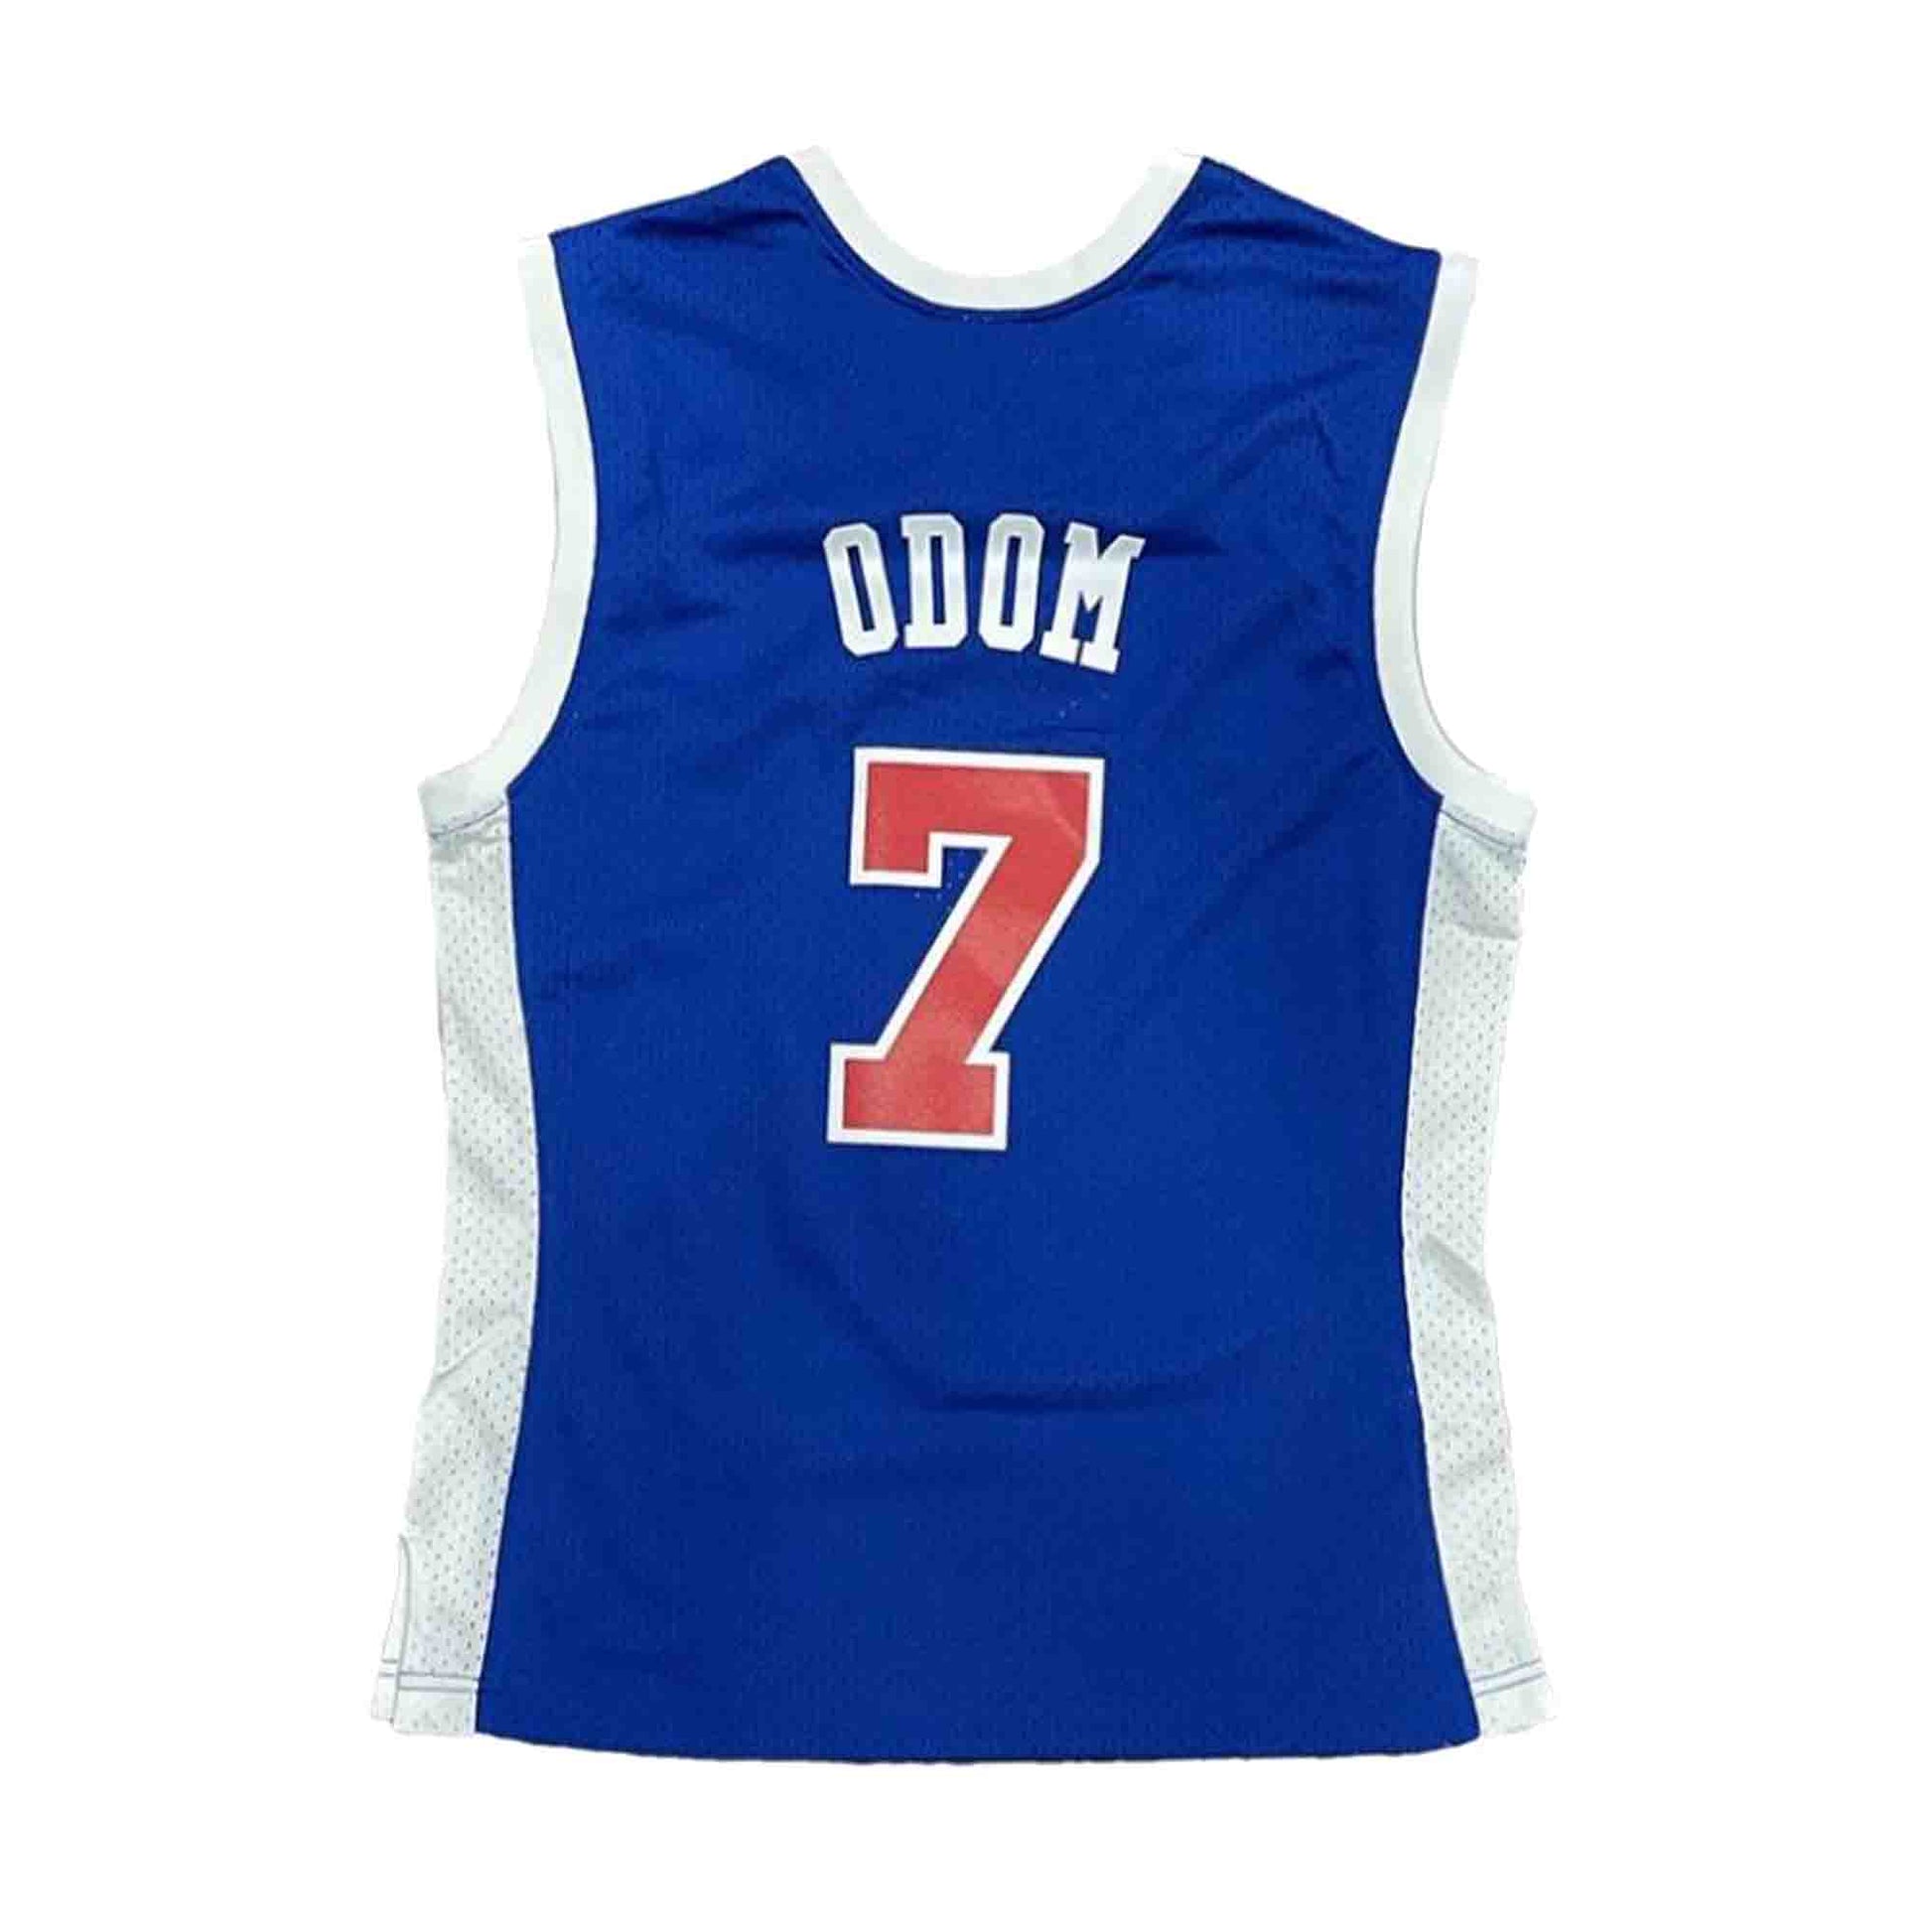 2002-03 Los Angeles Clippers Lamar Odom #7 Game Used Blue Jersey DP05028